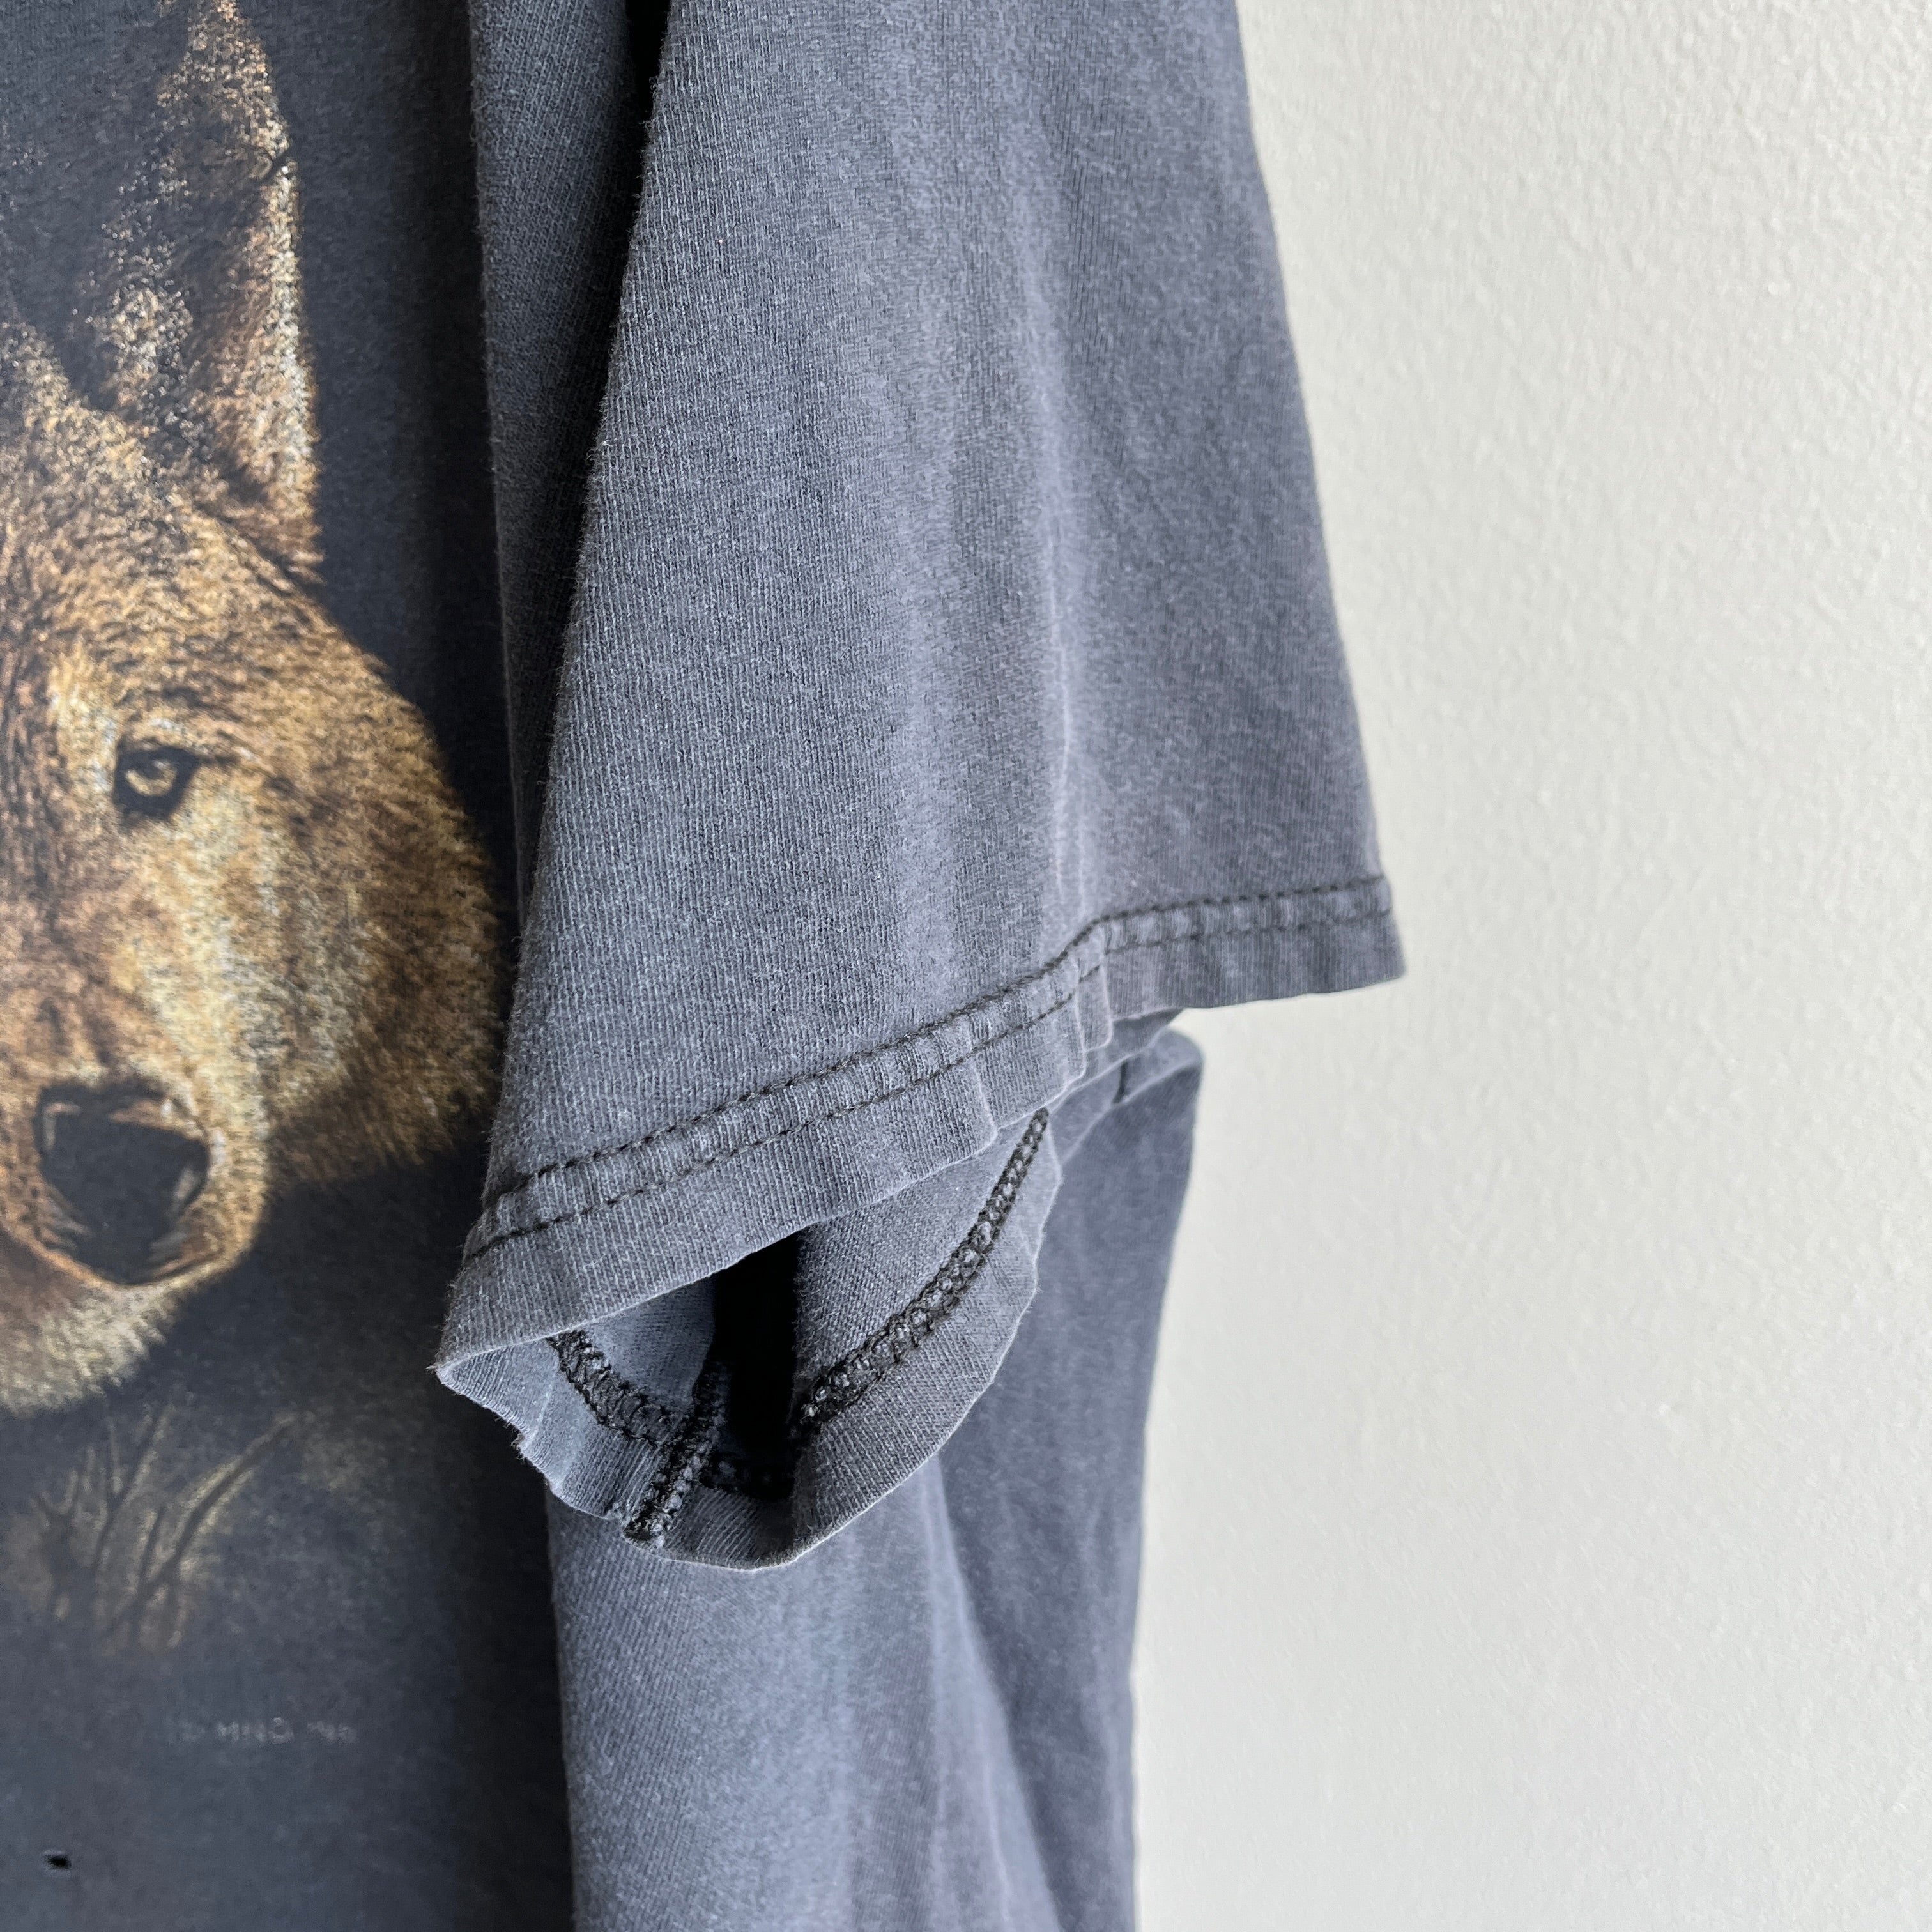 1996 Thrashed and Faded Wolf Face T-Shirt